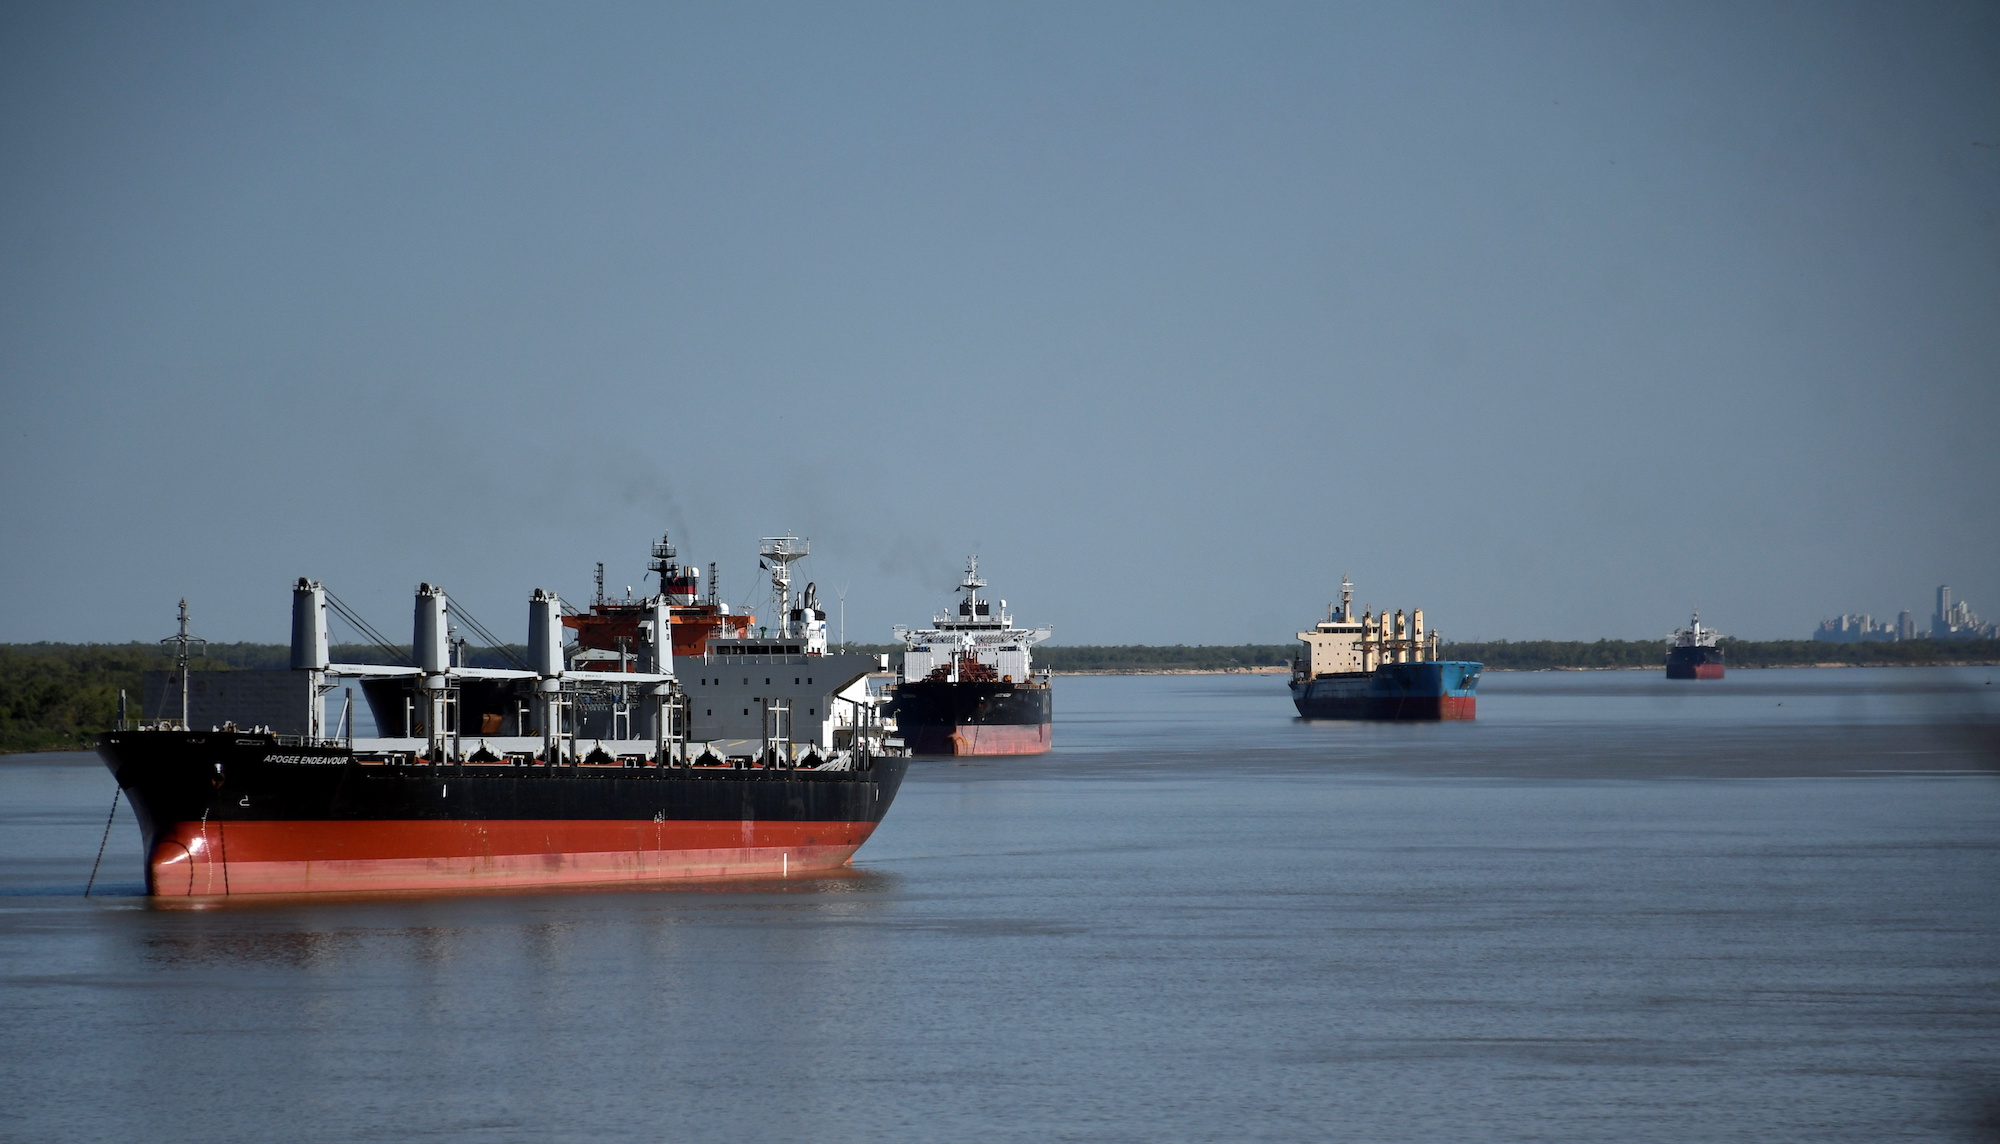 Transport ships on the river